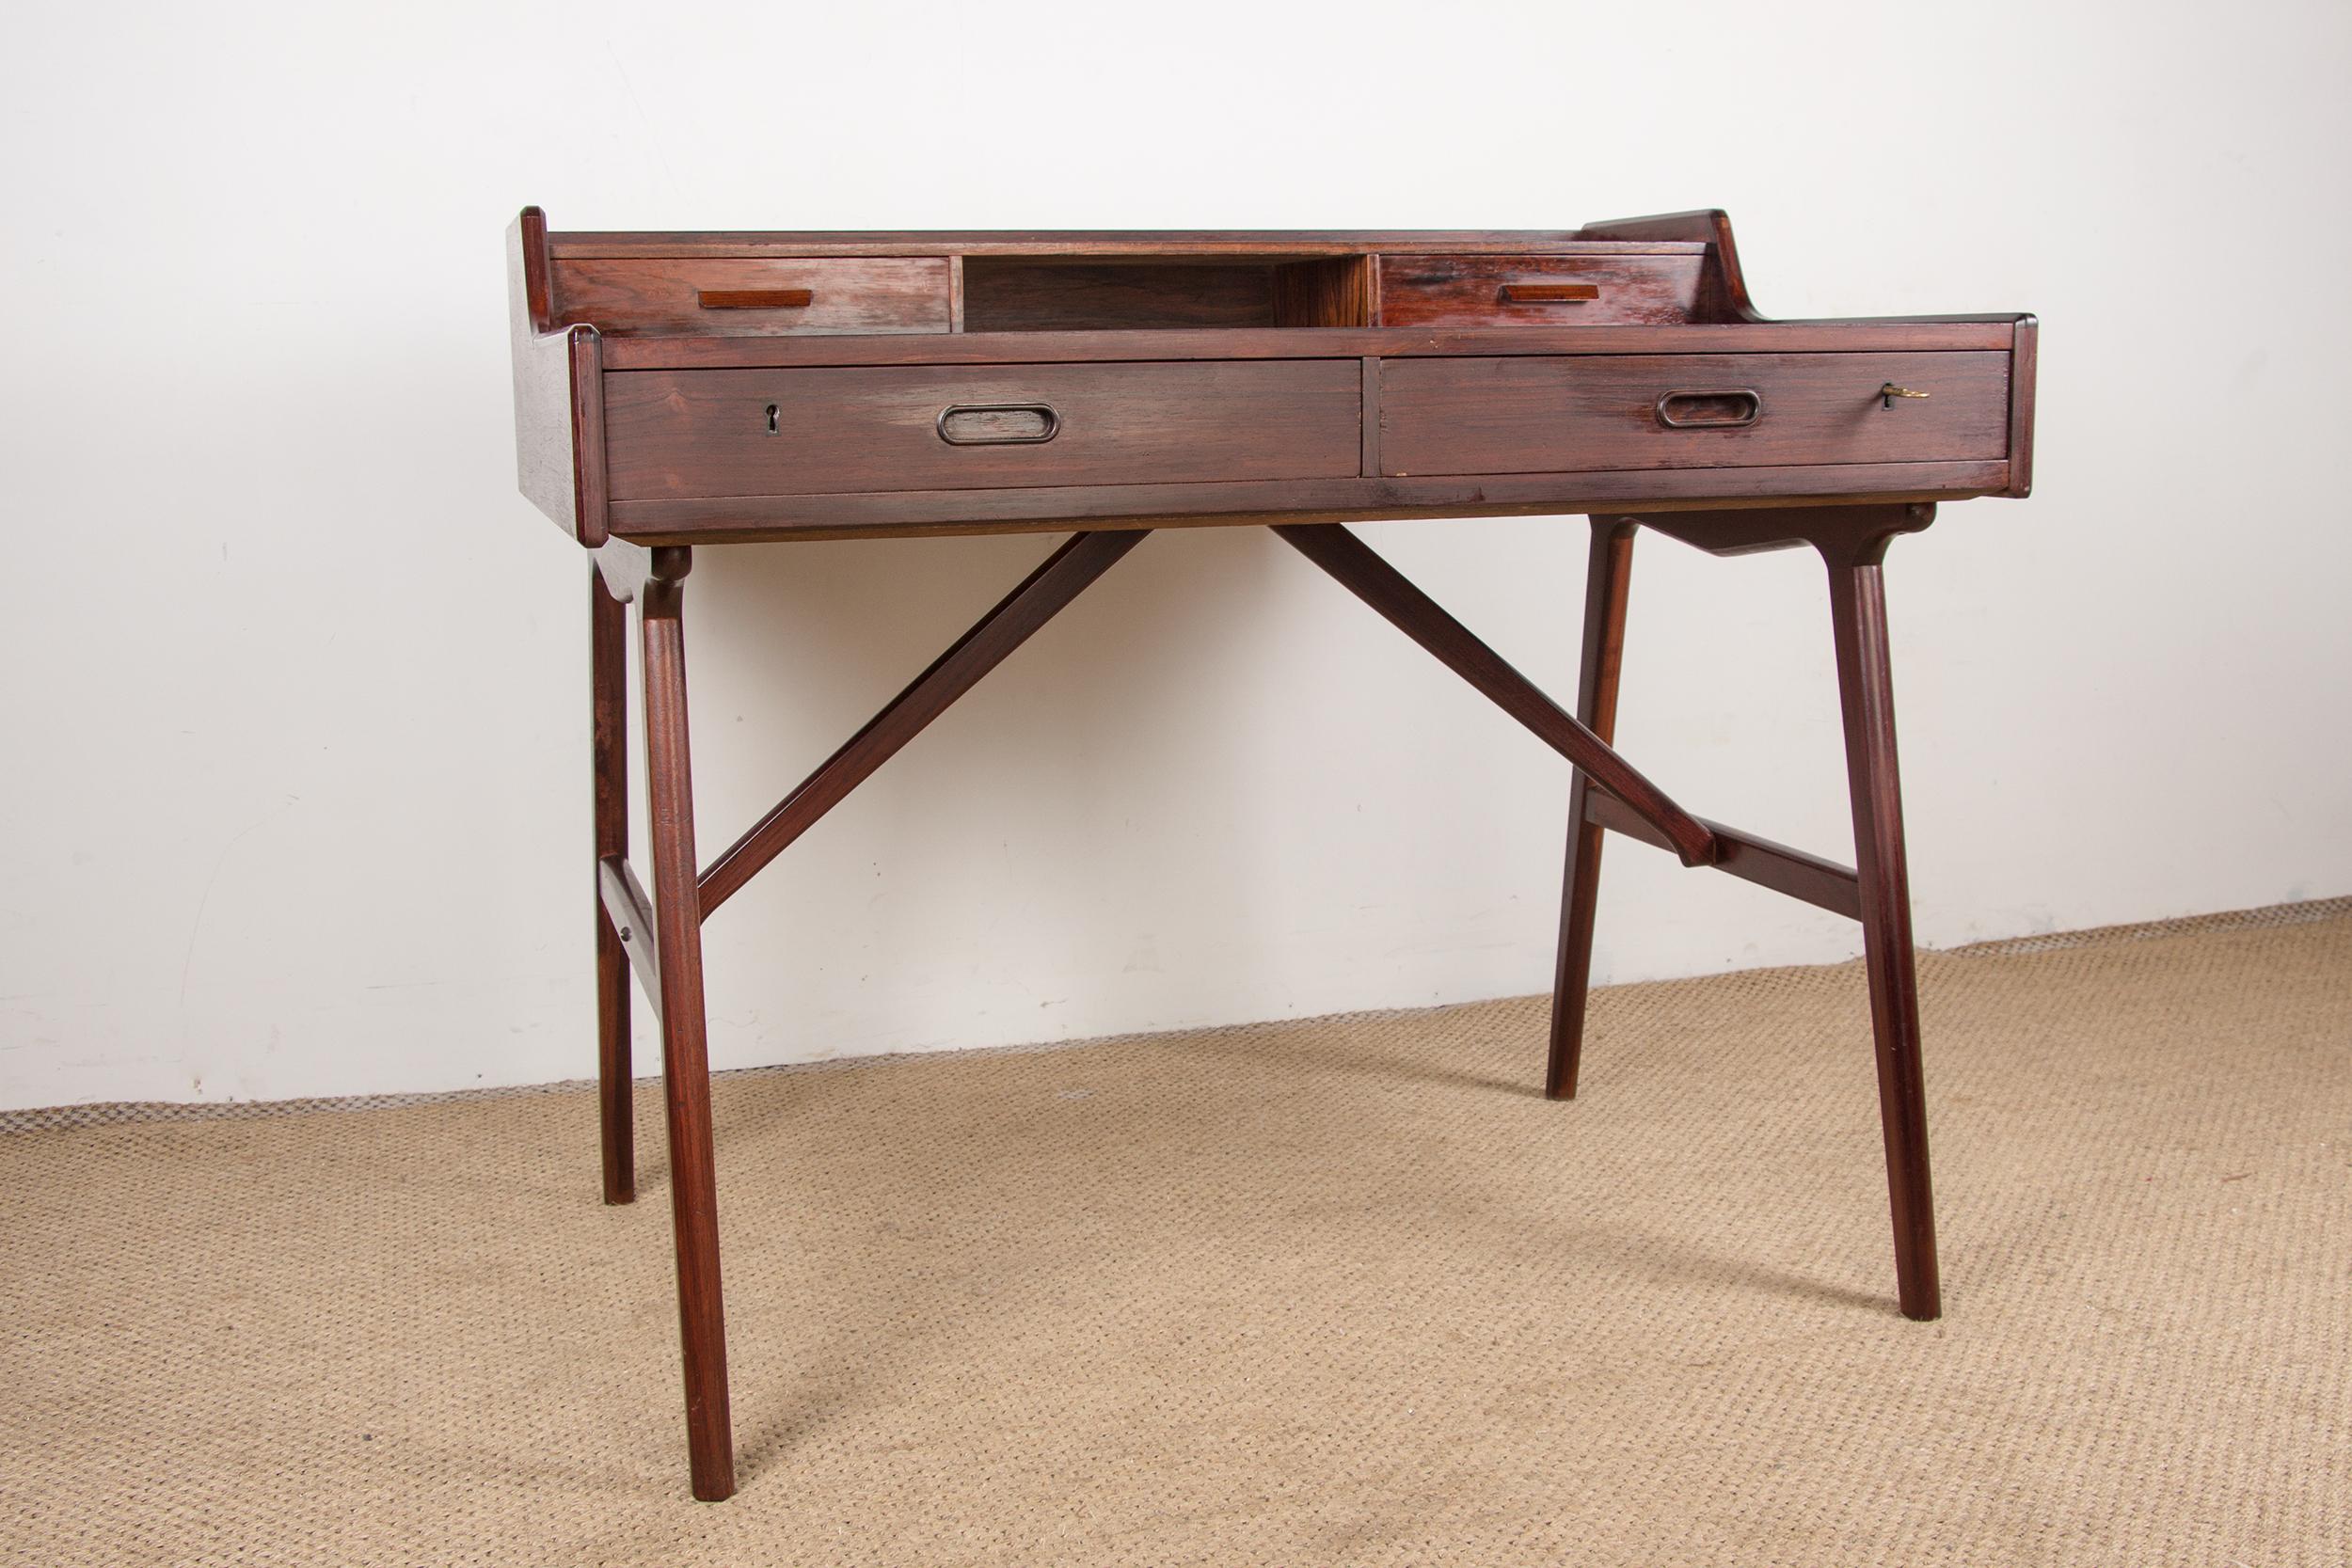 Superb Scandinavian desk with a very elegant sleek design. 2 large and 2 small drawers on the front face with a niche between the 2 small drawers. Particularly graceful cross base which gives all its charm to this beautifully crafted piece of